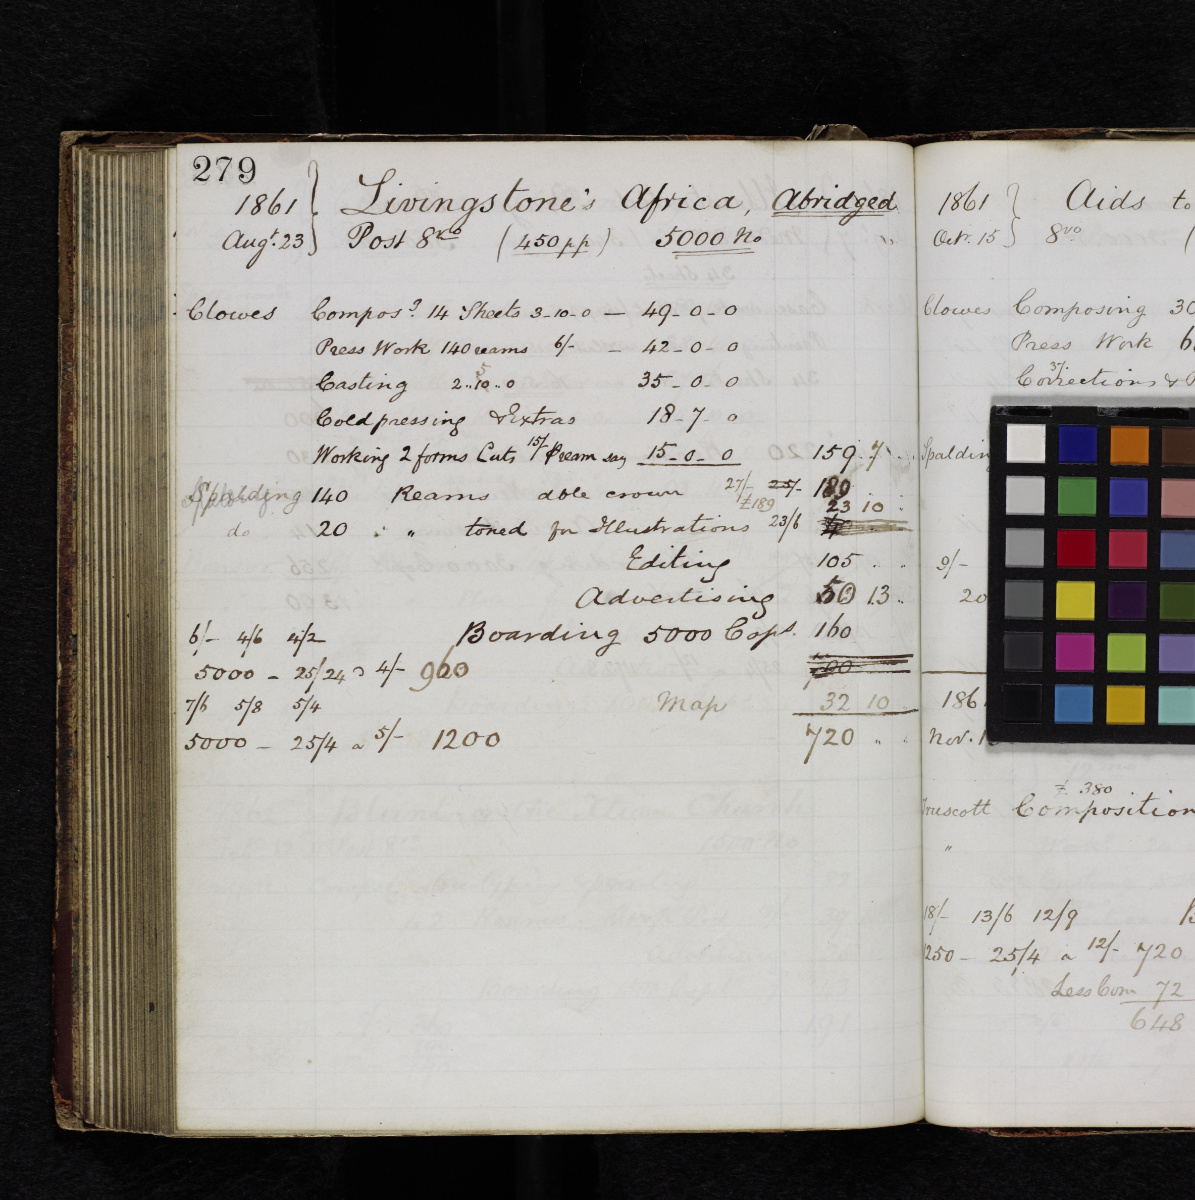 Image of a page from John Murray’s Estimate Book: Expected Costs of Publishing Livingstone’s Africa, Abridged (Murray 1850-1866:[1]). Copyright National Library of Scotland. Creative Commons Share-alike 2.5 UK: Scotland (https://creativecommons.org/licenses/by-nc-sa/2.5/scotland/).